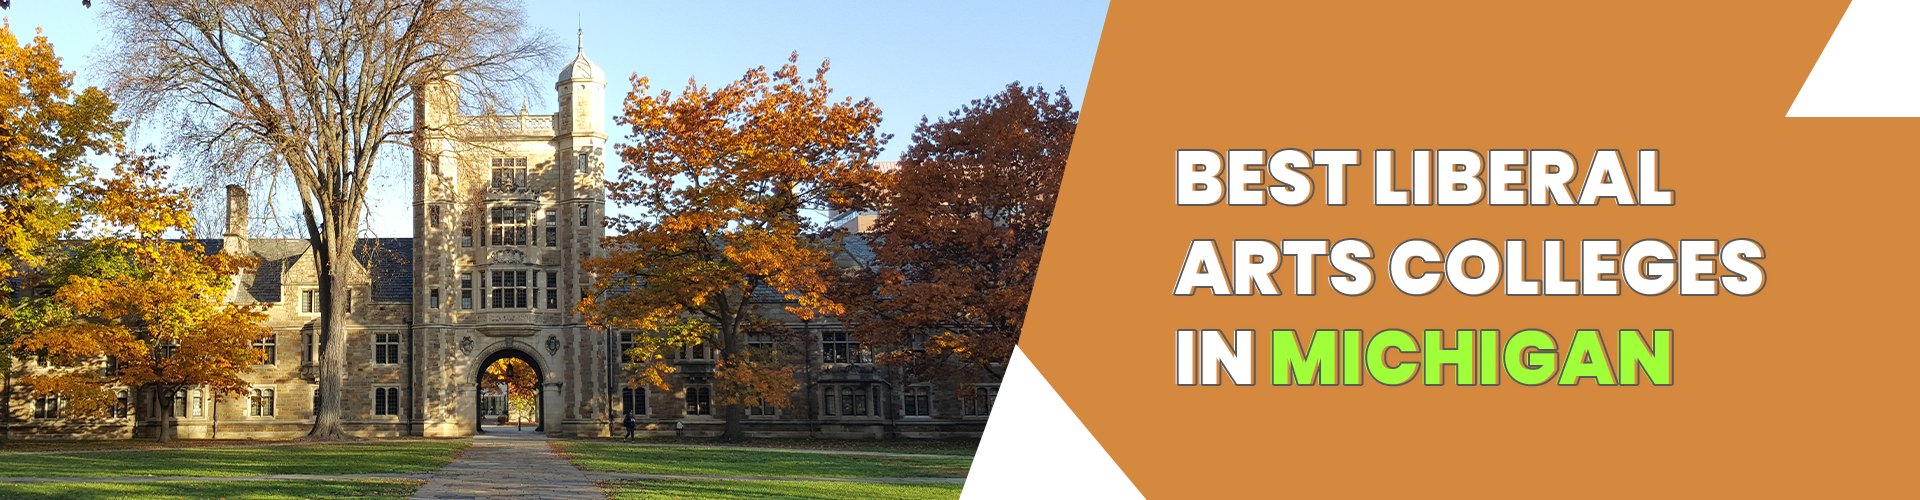 Best Liberal Arts Colleges in Michigan 1